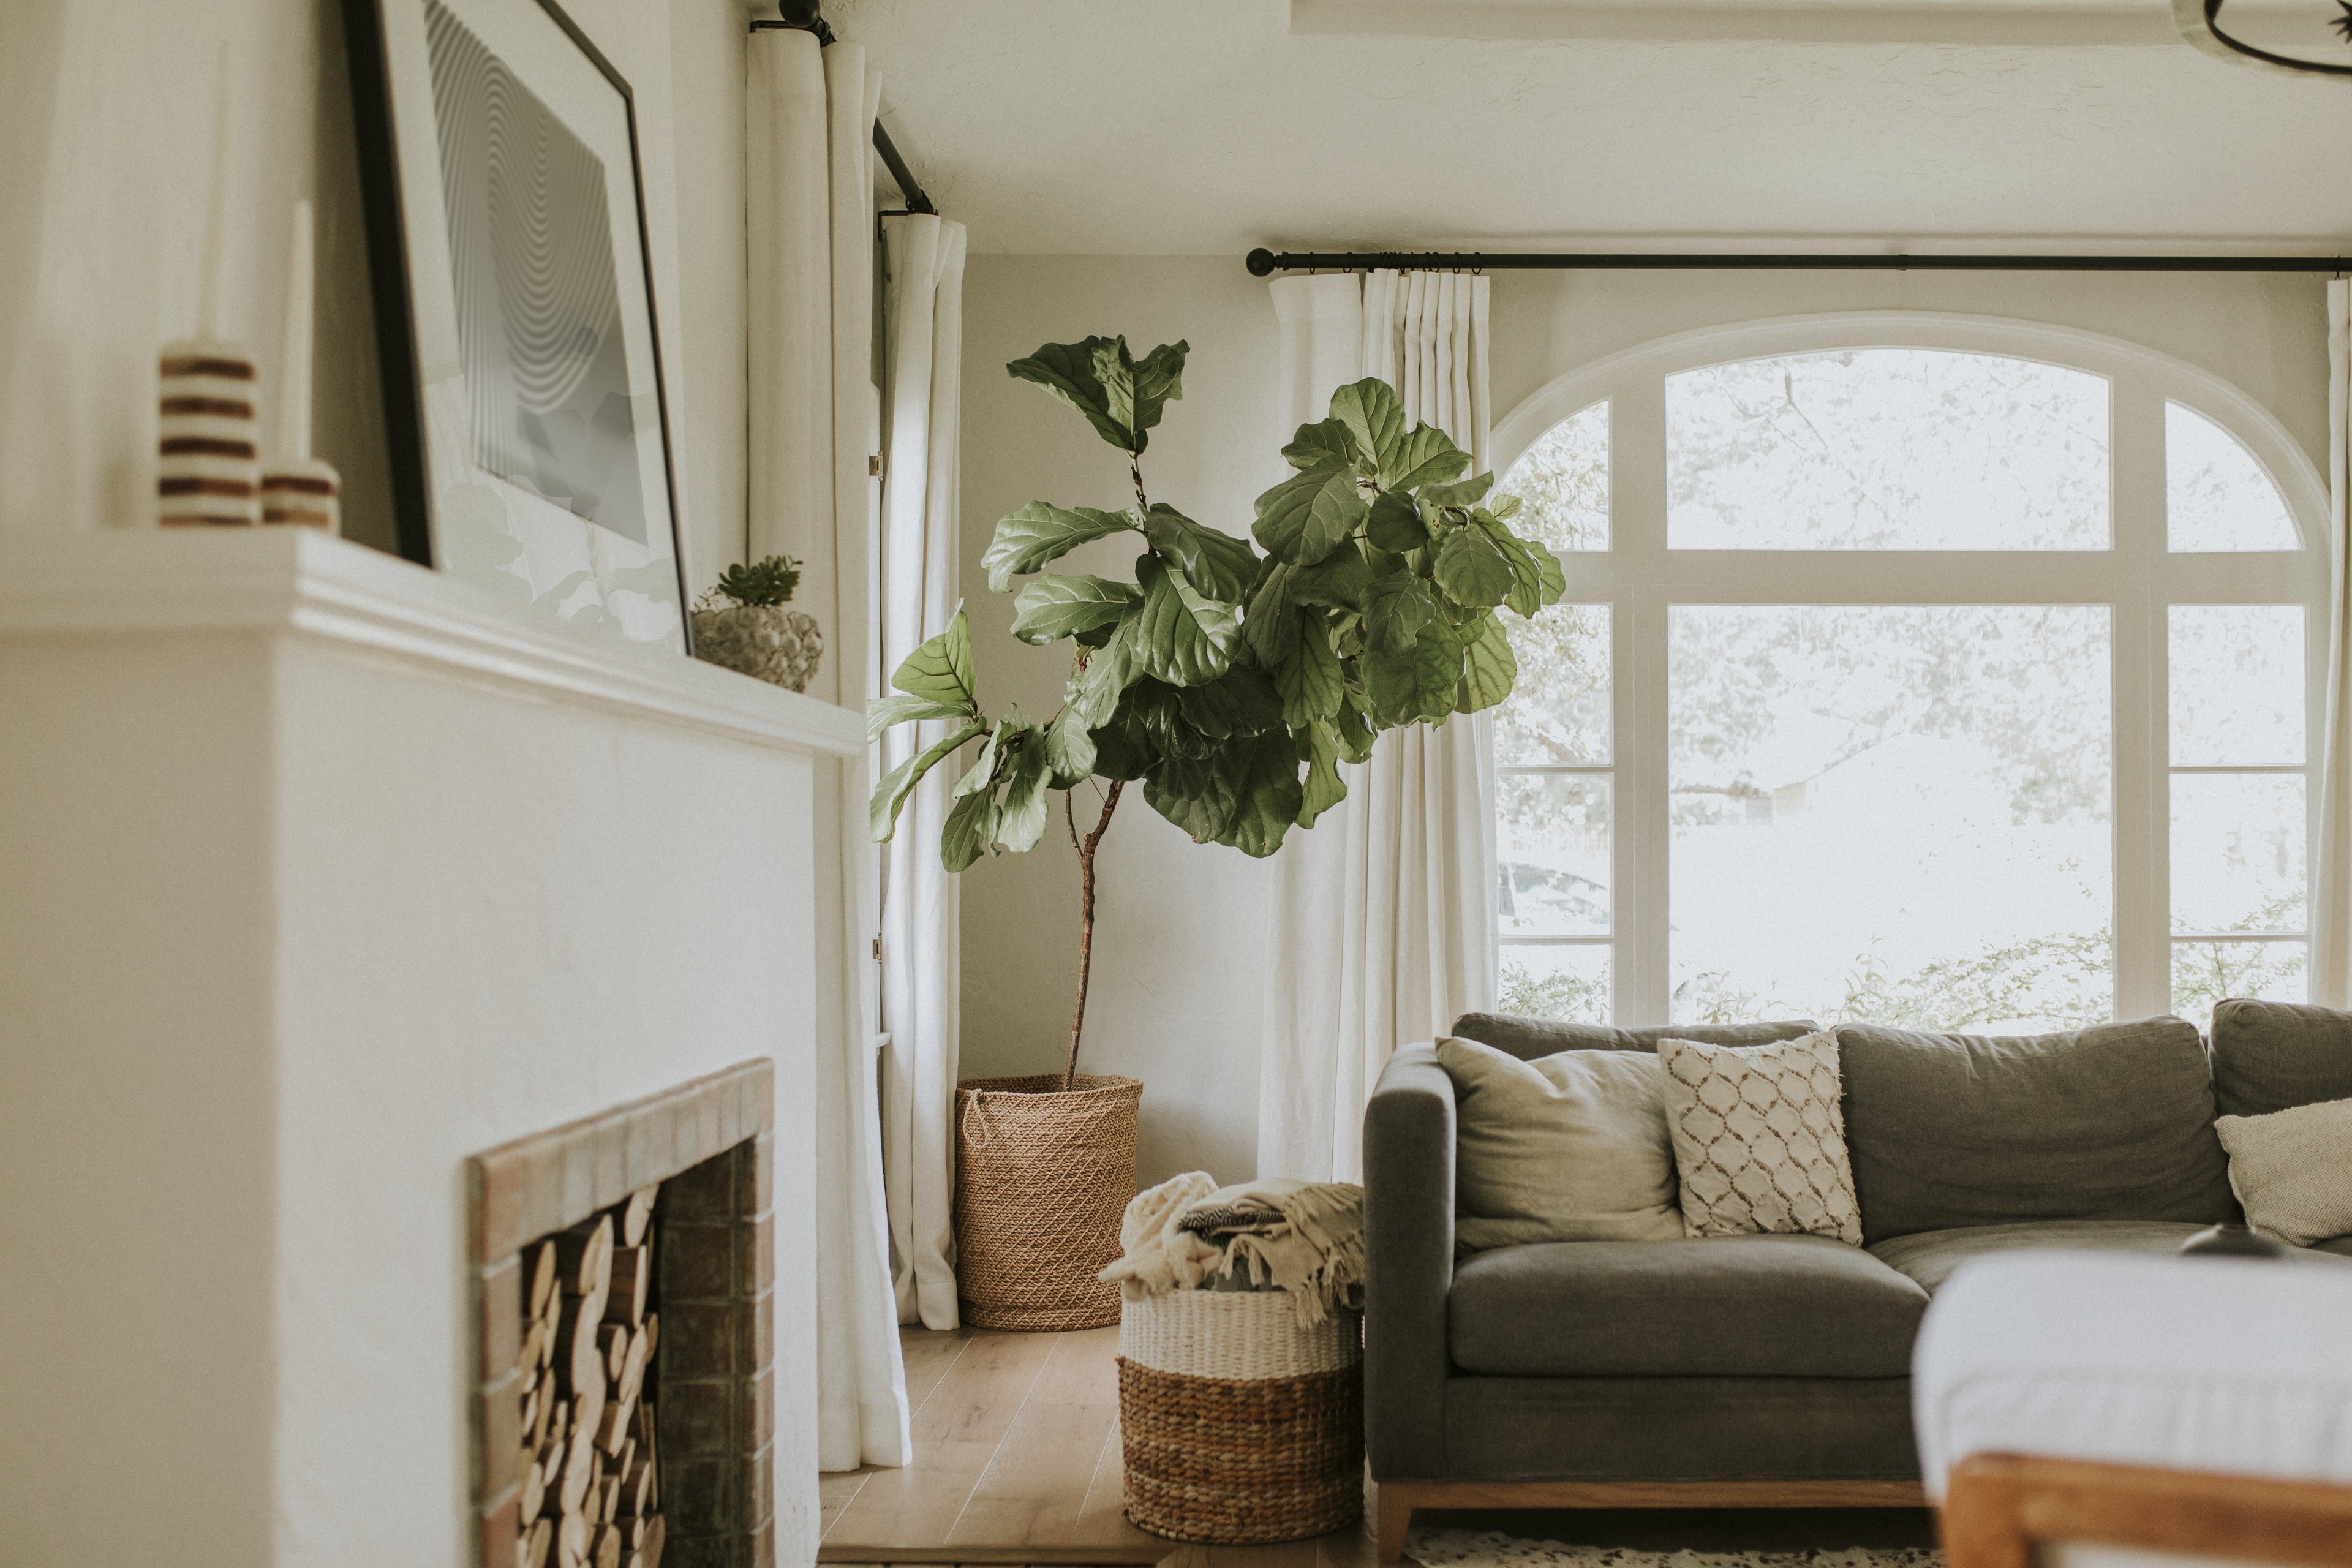 Living room with plants and cozy couch